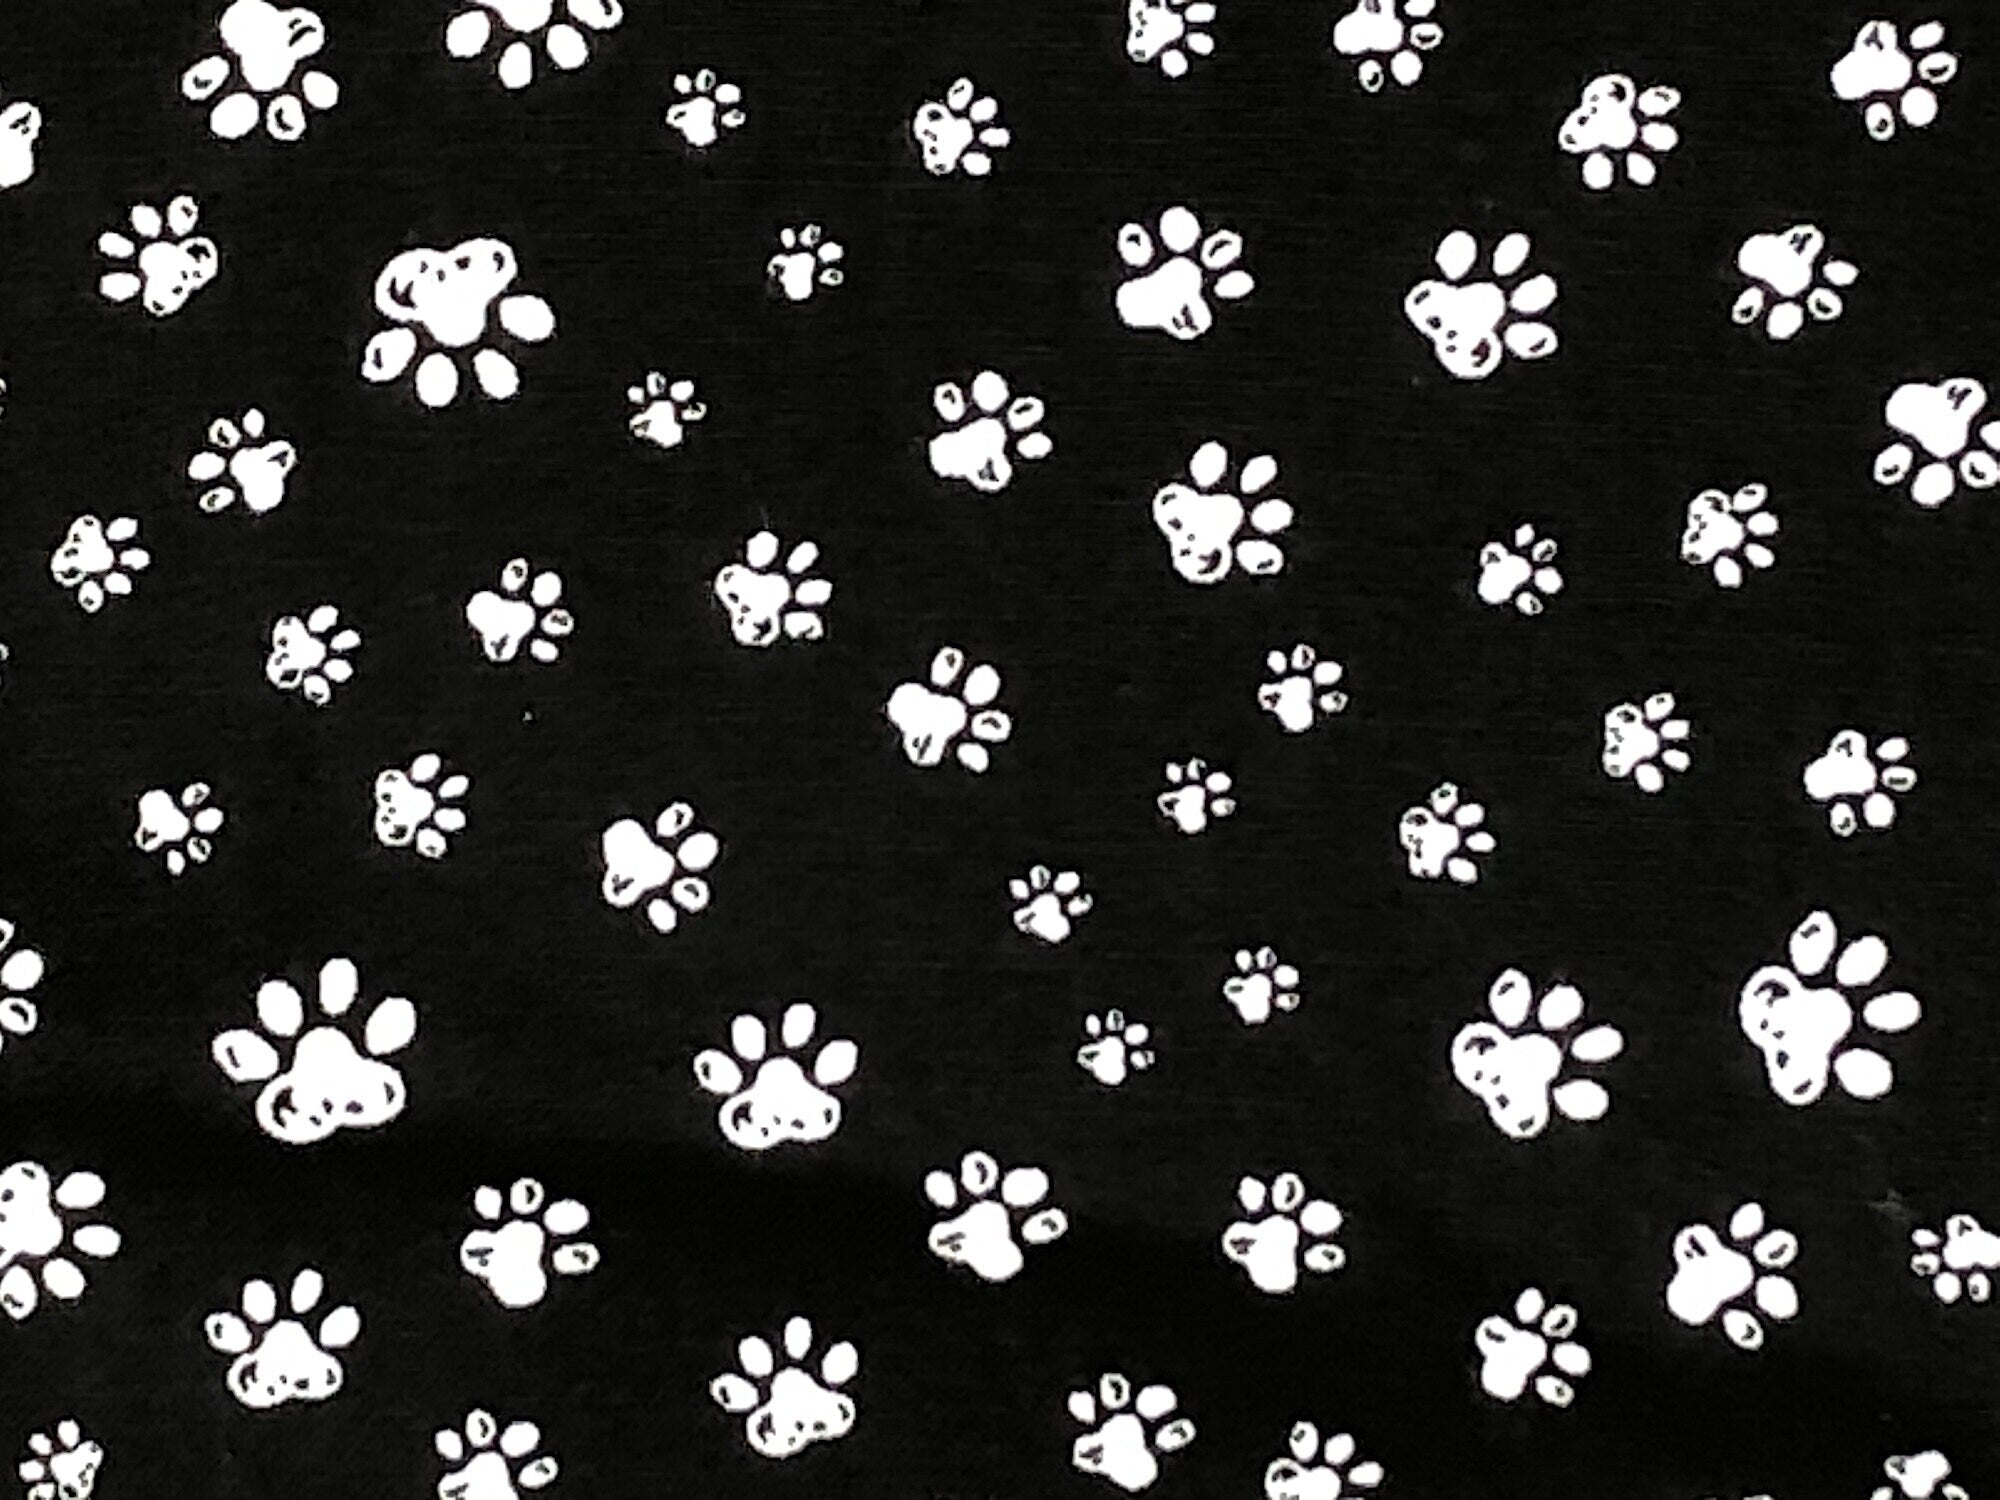 This fabric is a cute White Paw print design on a Black background.